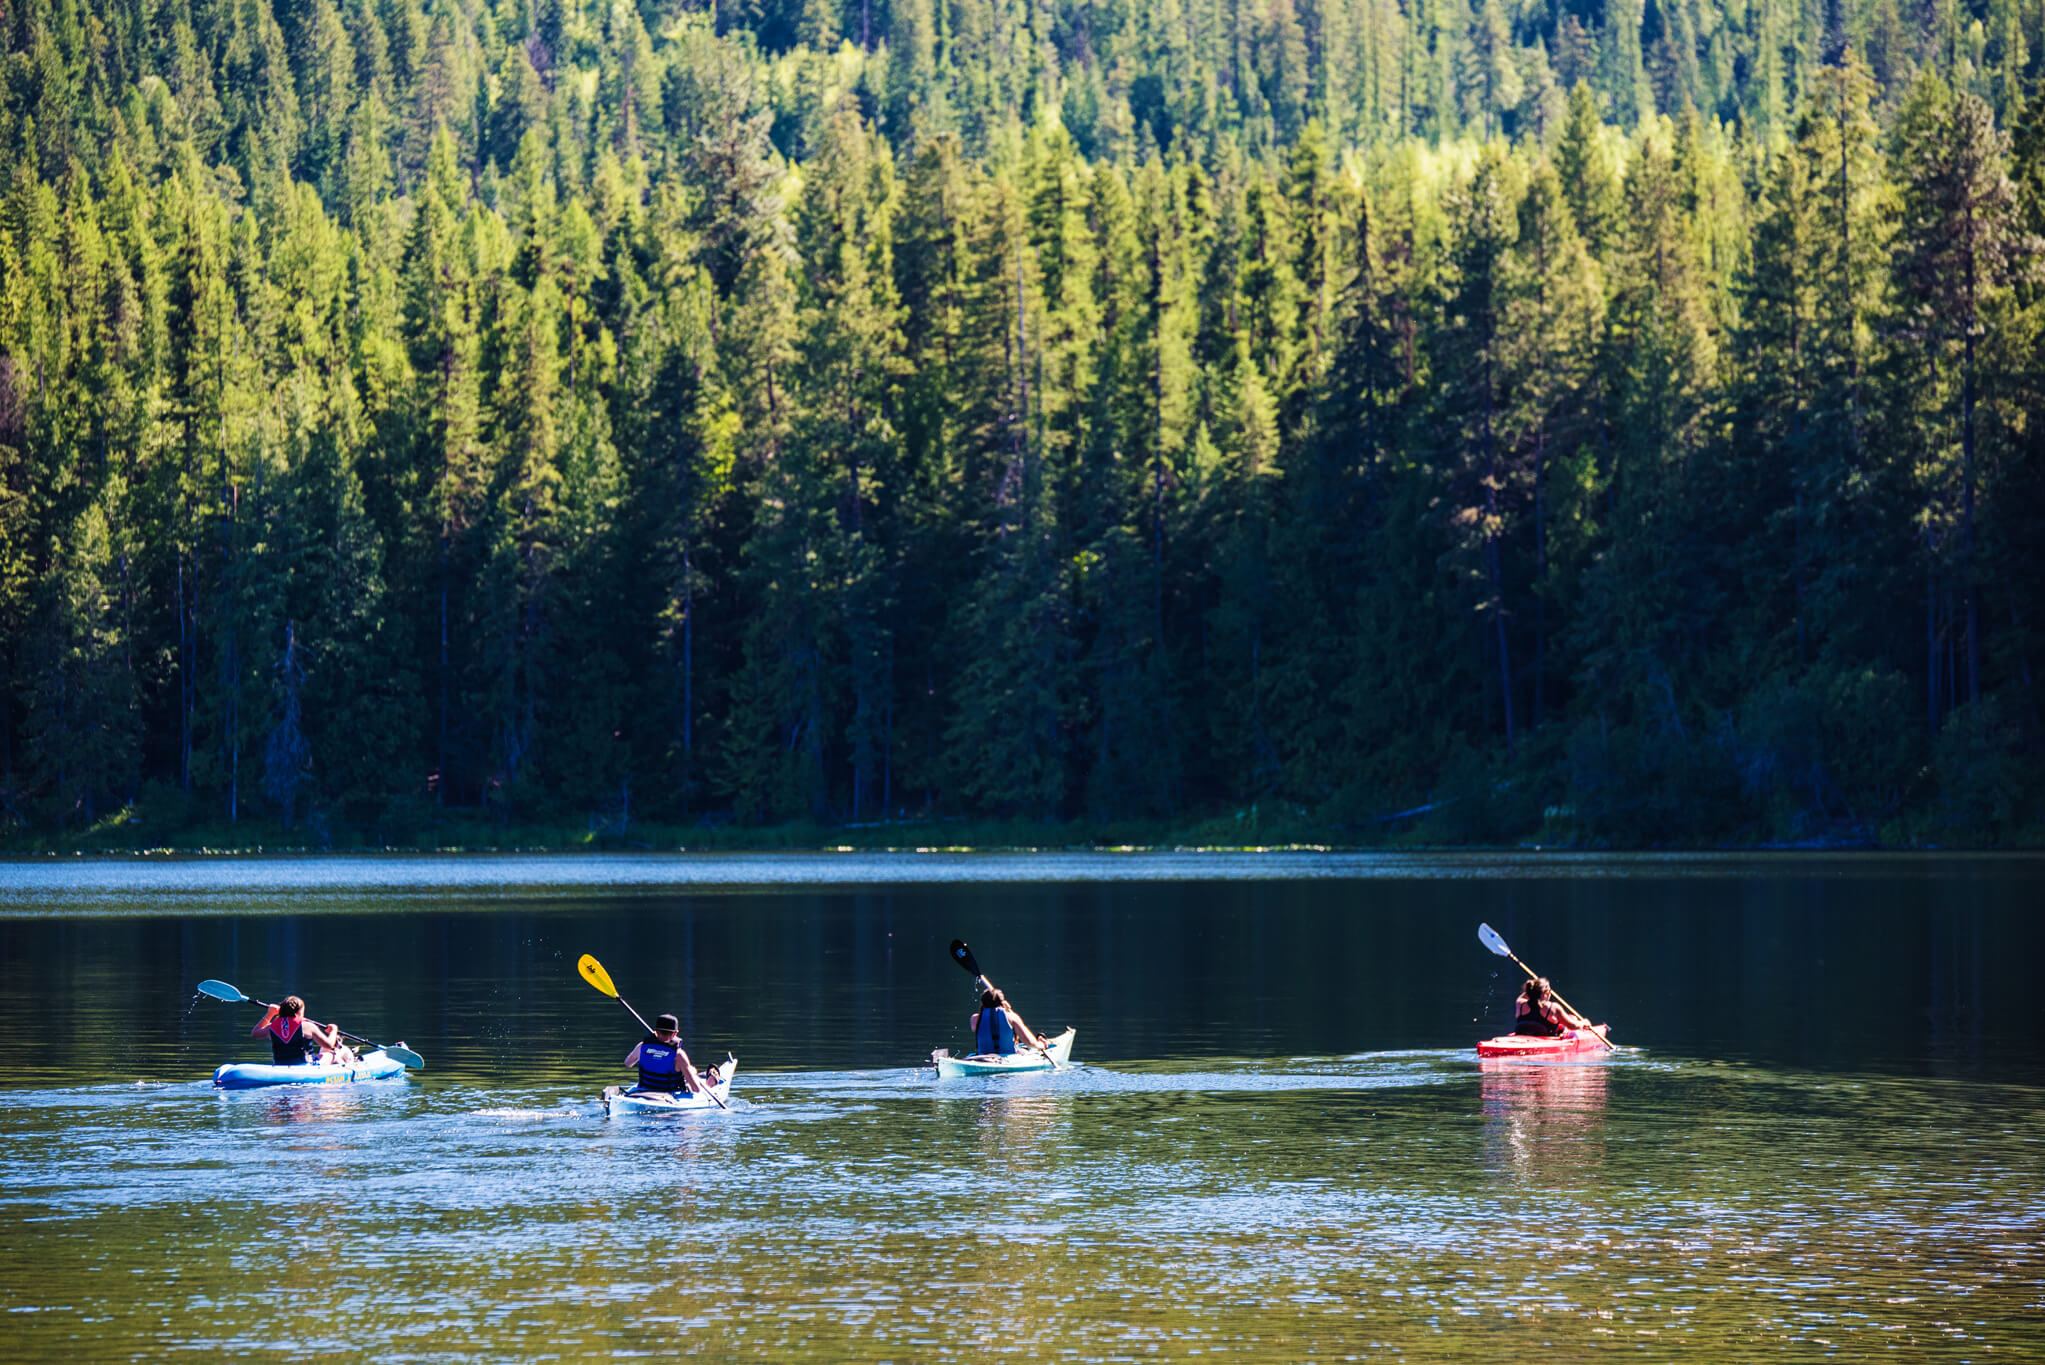 A group of people paddling kayaks on Round Lake, and a forest of tall trees in the background.